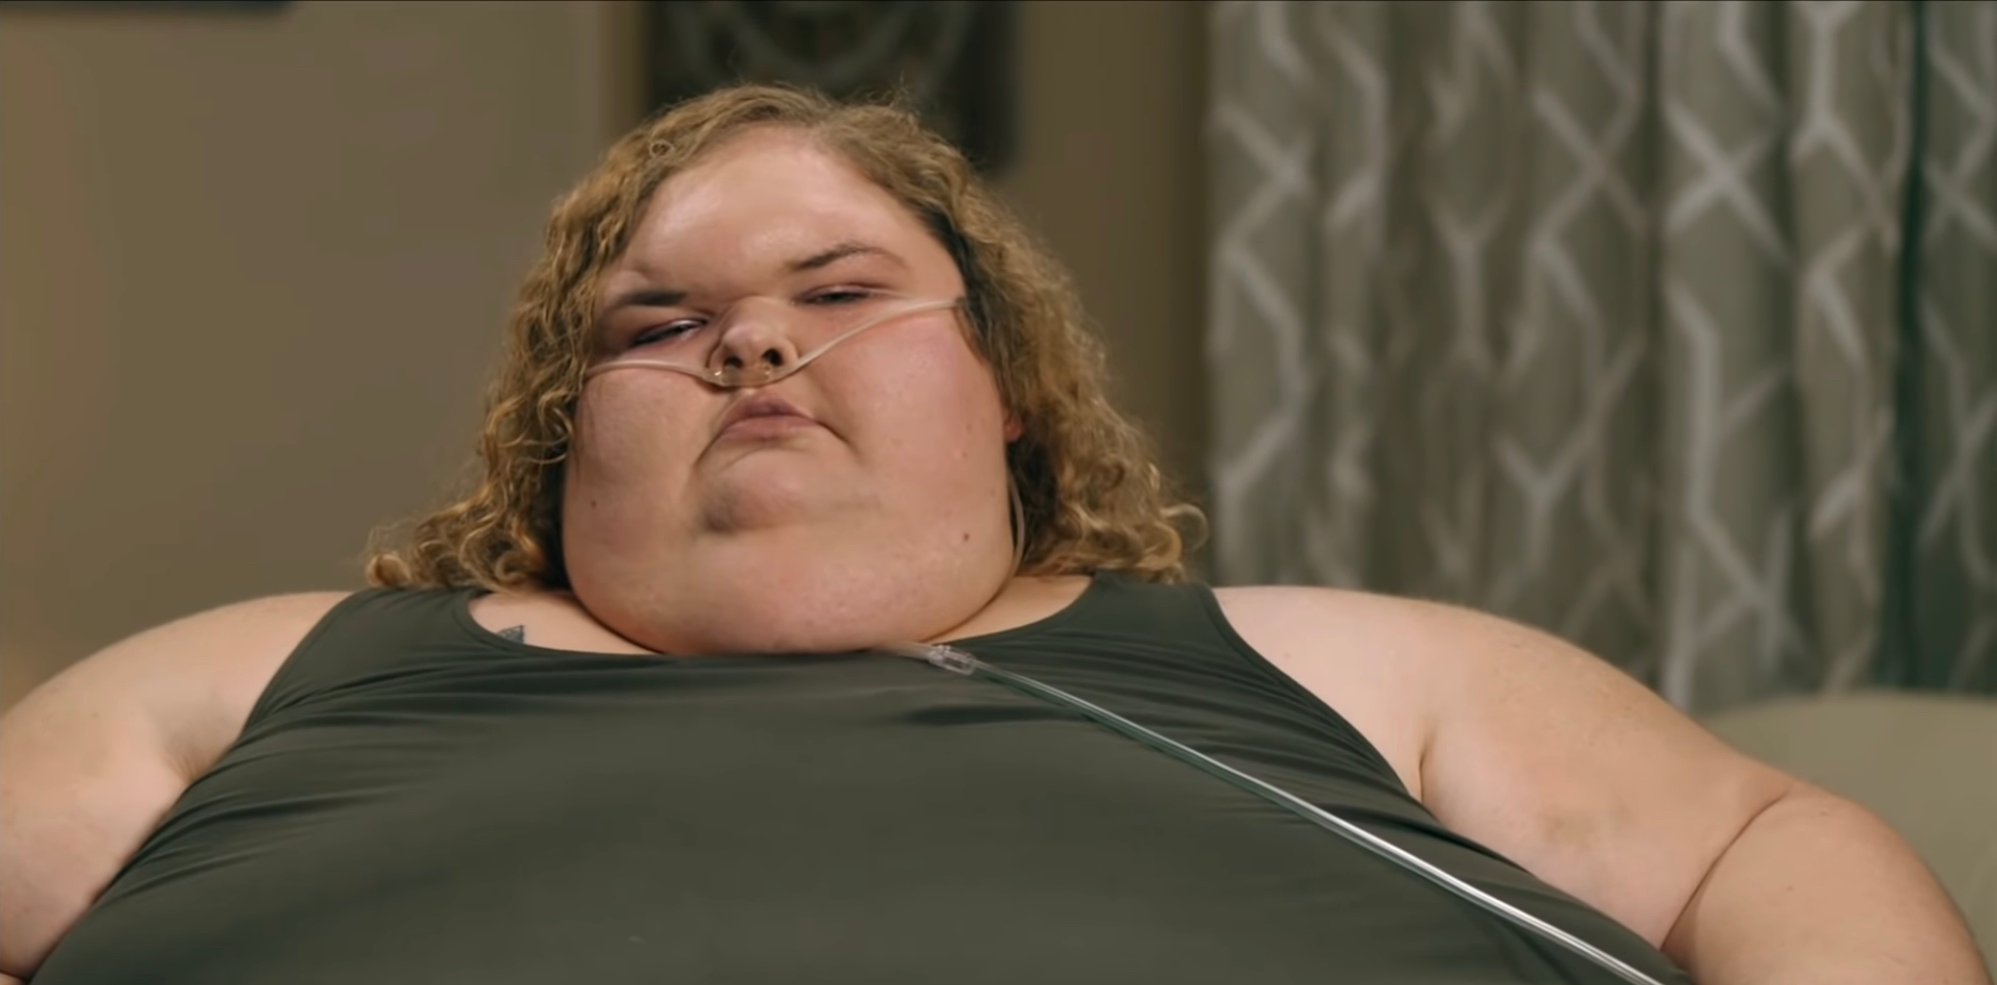 Tammy From '1000-Lb Sisters' May Have Prolonged Stay in ...